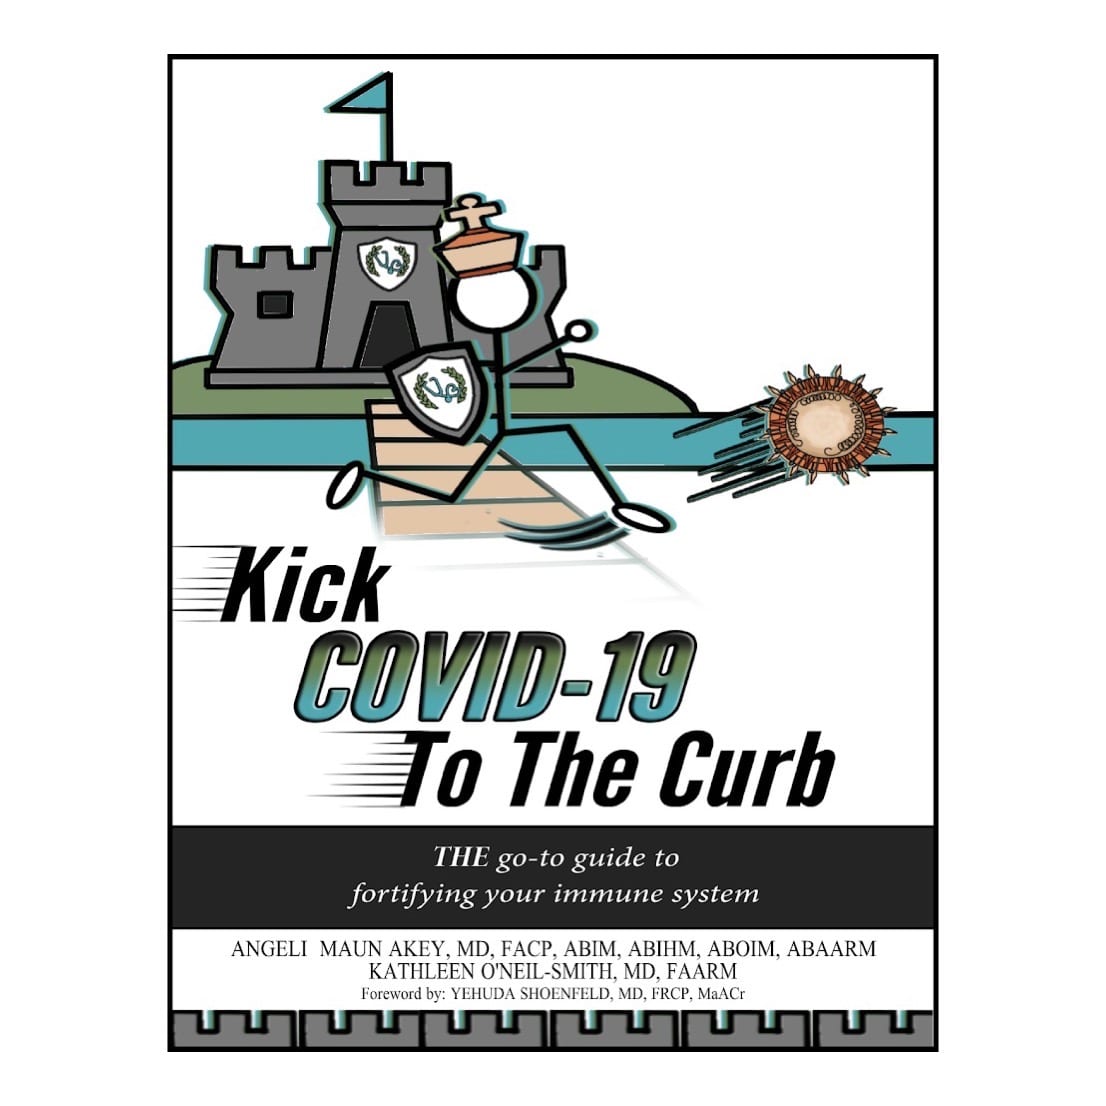 Idiom: Kick to the Curb (Meaning & Examples)